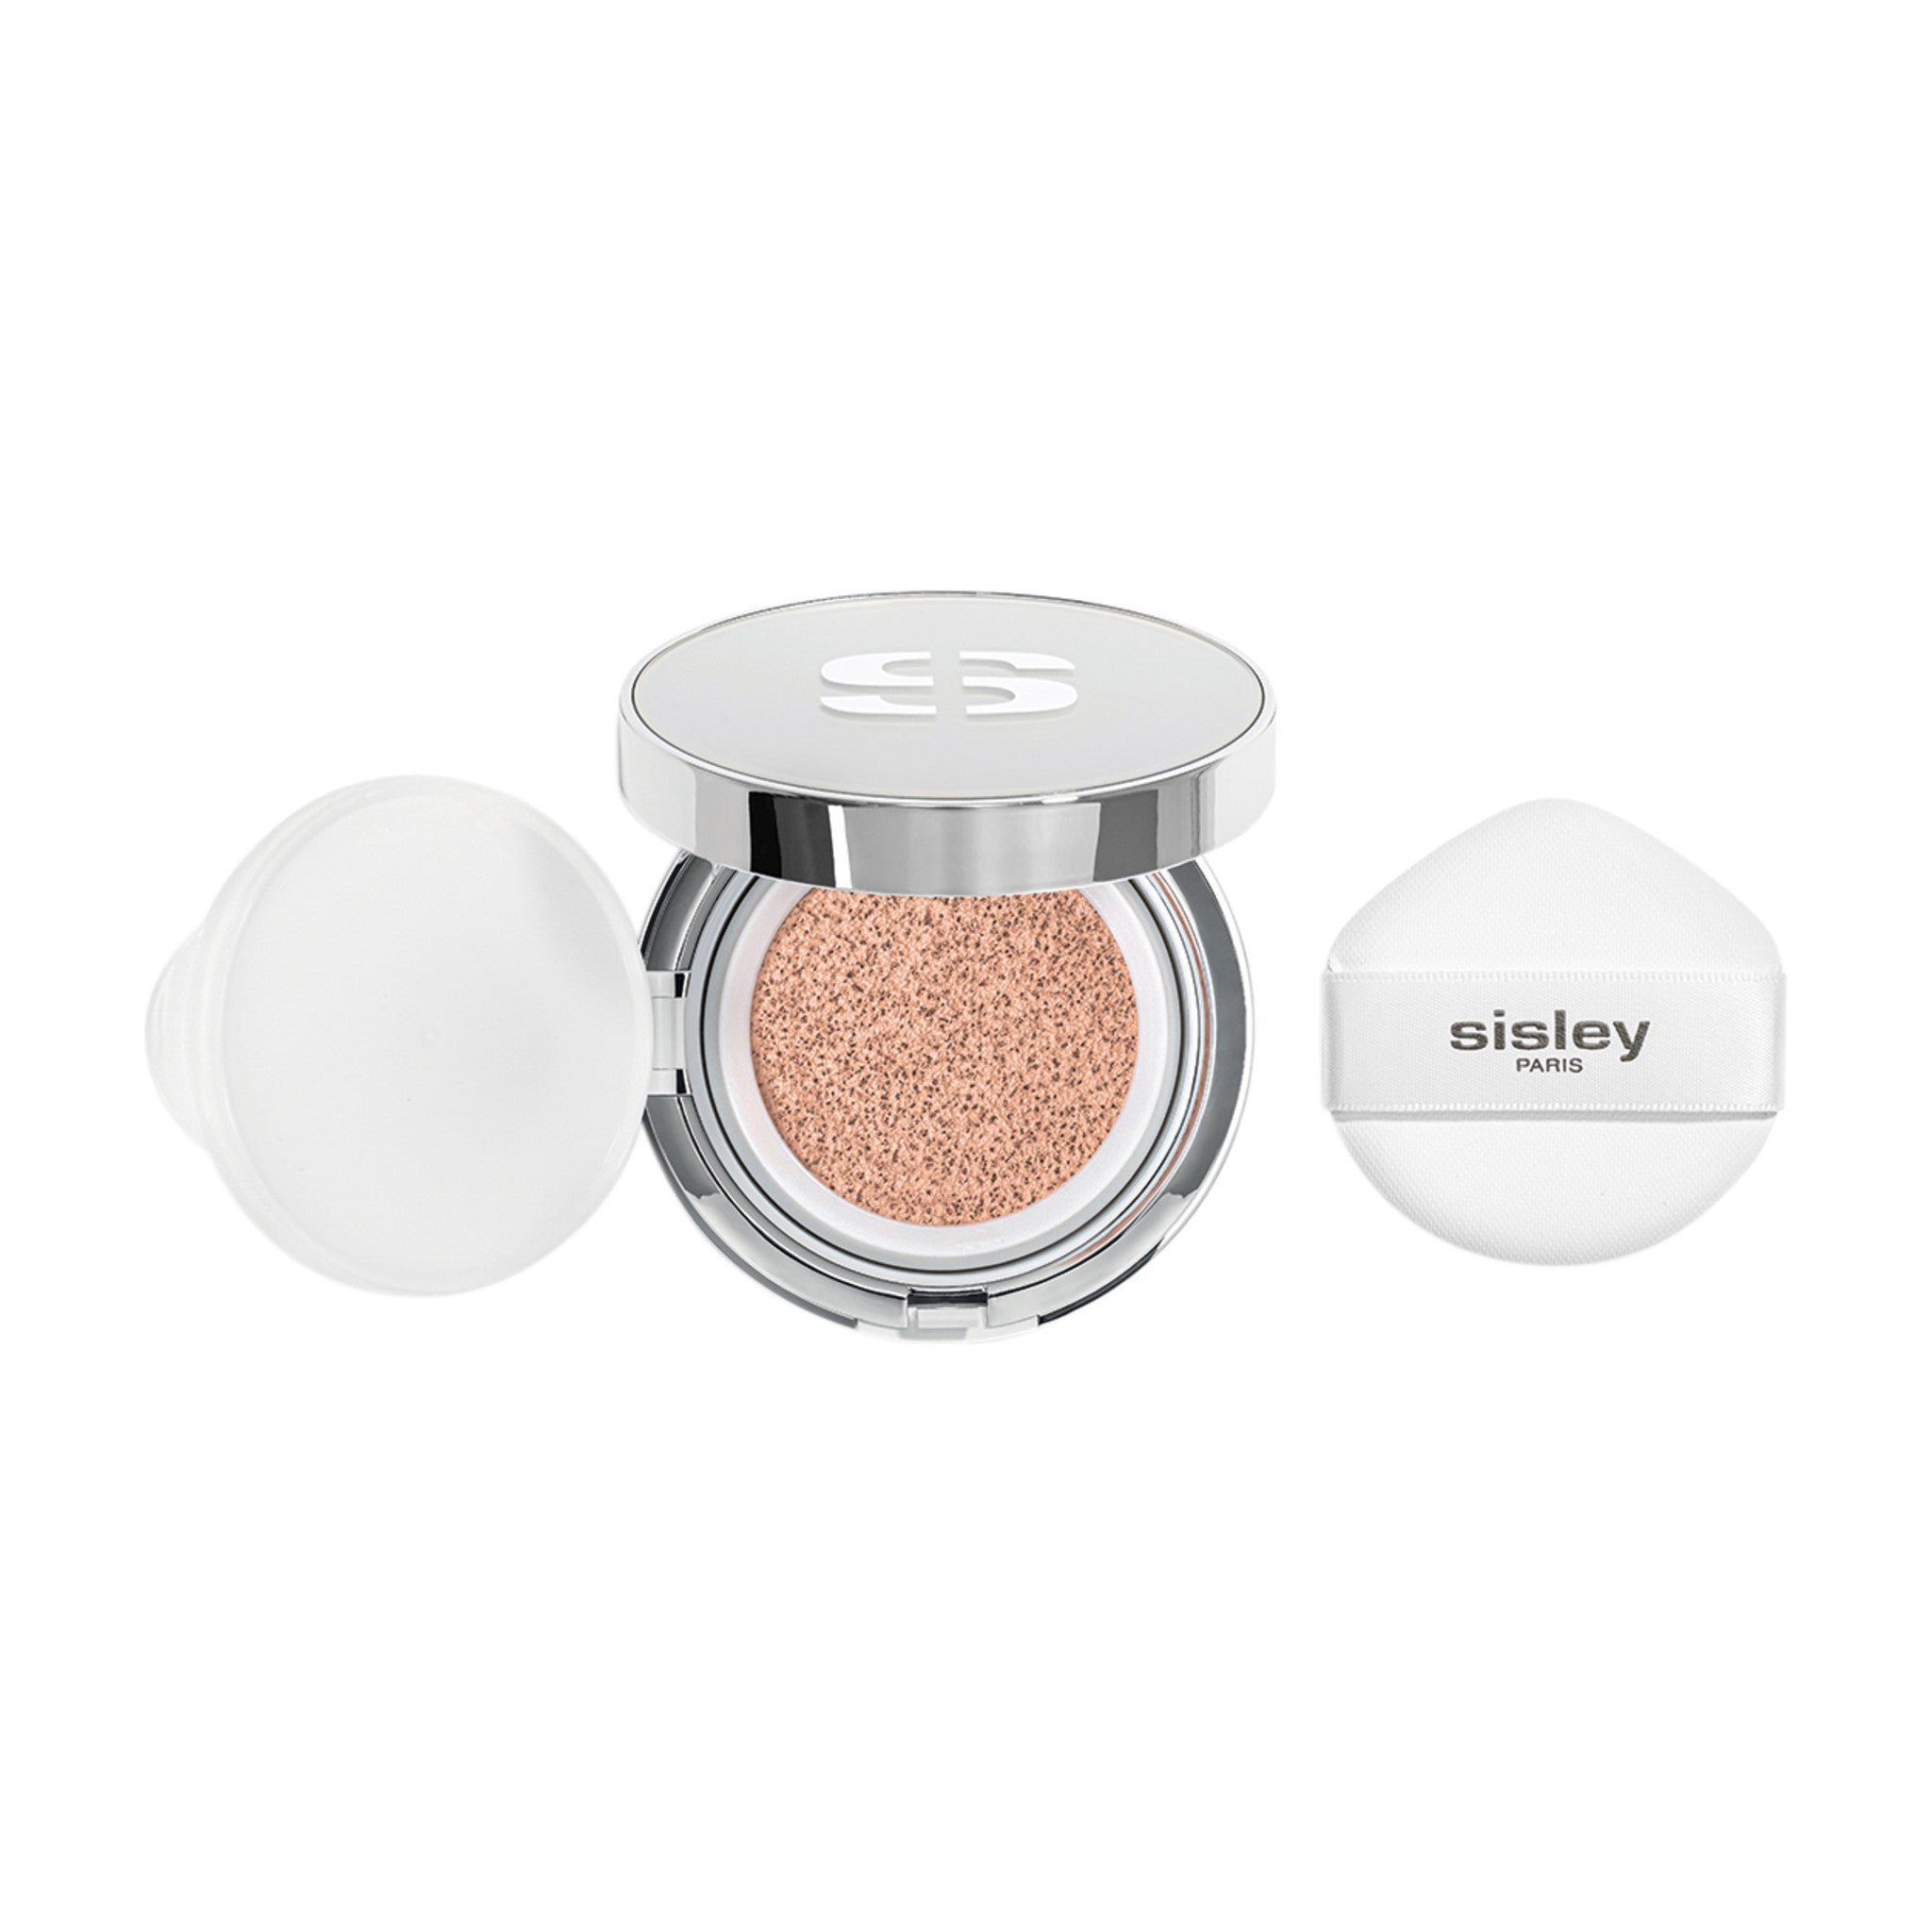 Sisley-Paris Phyto-Blanc Le Cushion Foundation Color/Shade variant: 00C Swan main image. This product is for light cool complexions